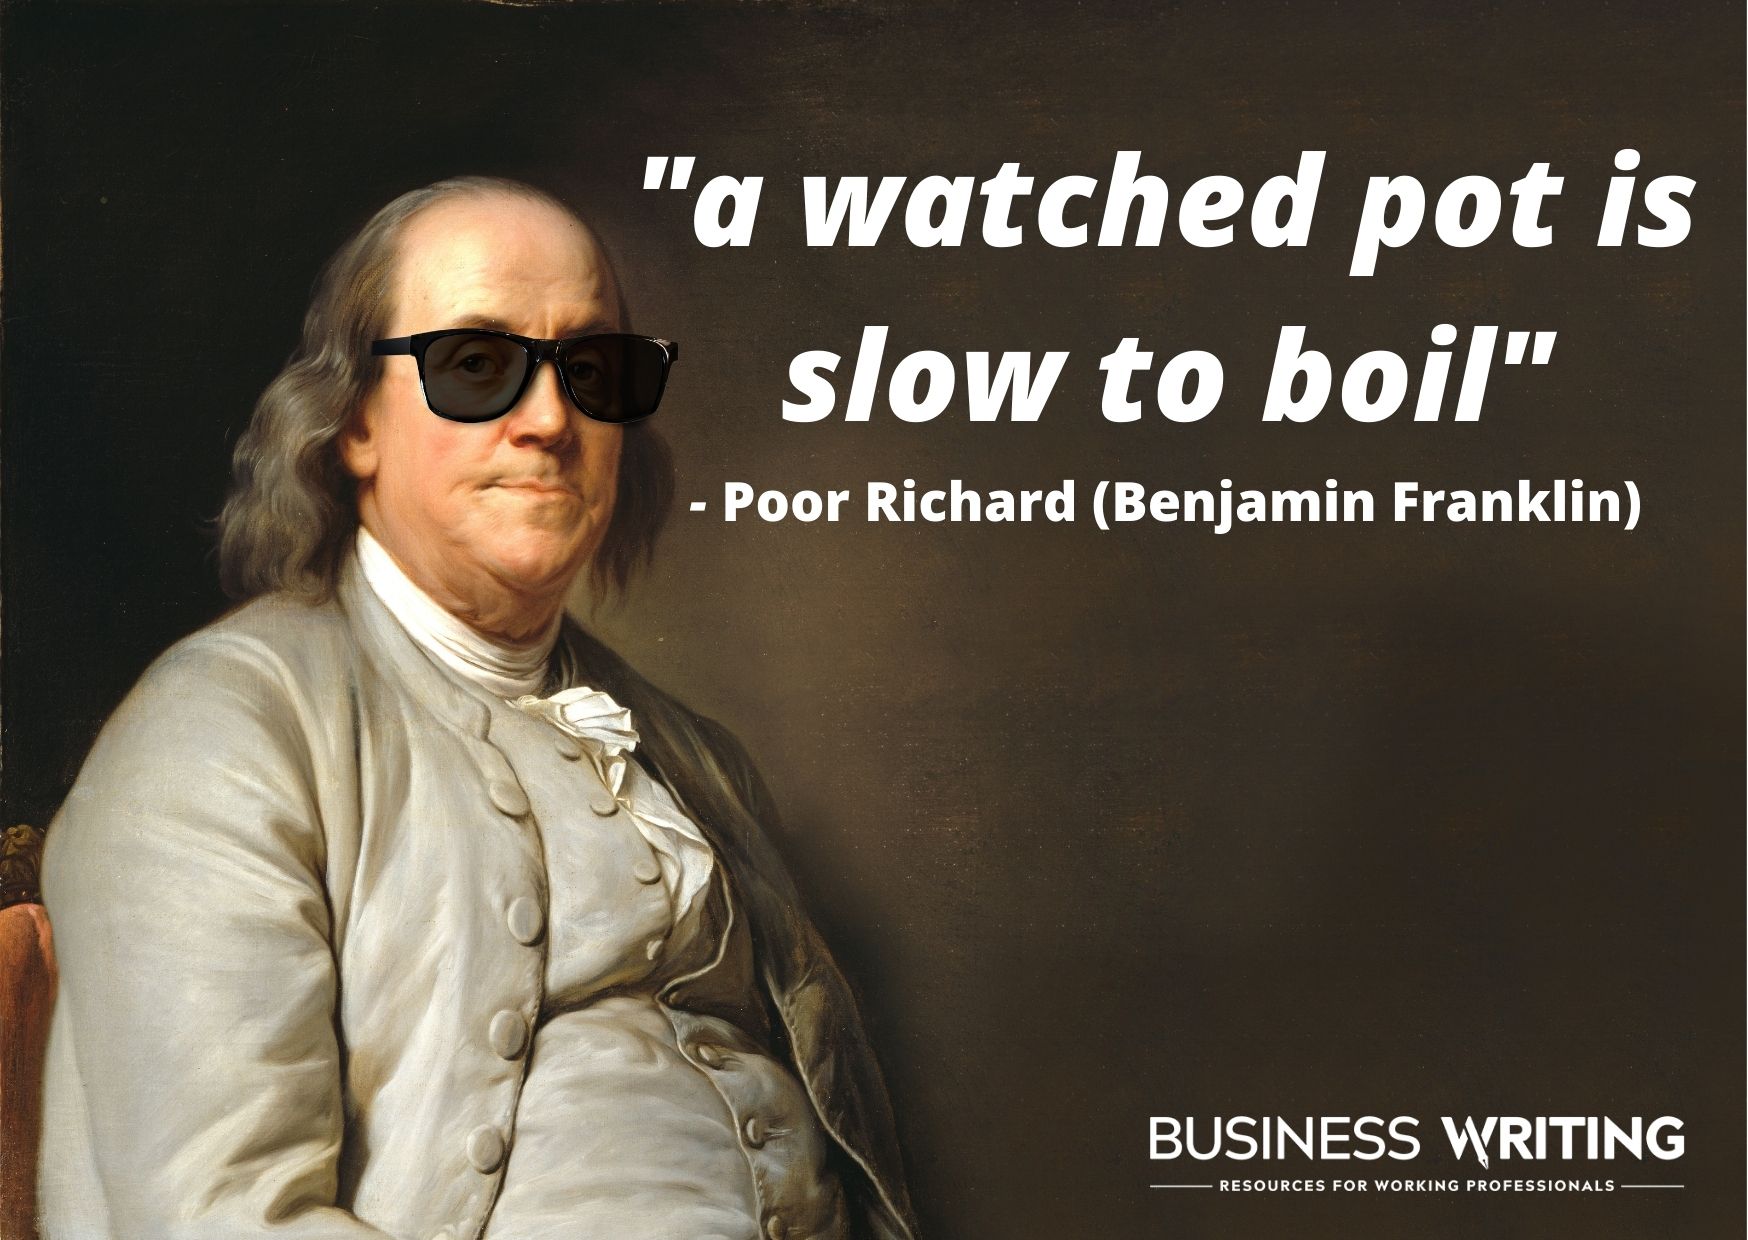 Benjamin Franklin's quote "a watched pot is slow to boil"